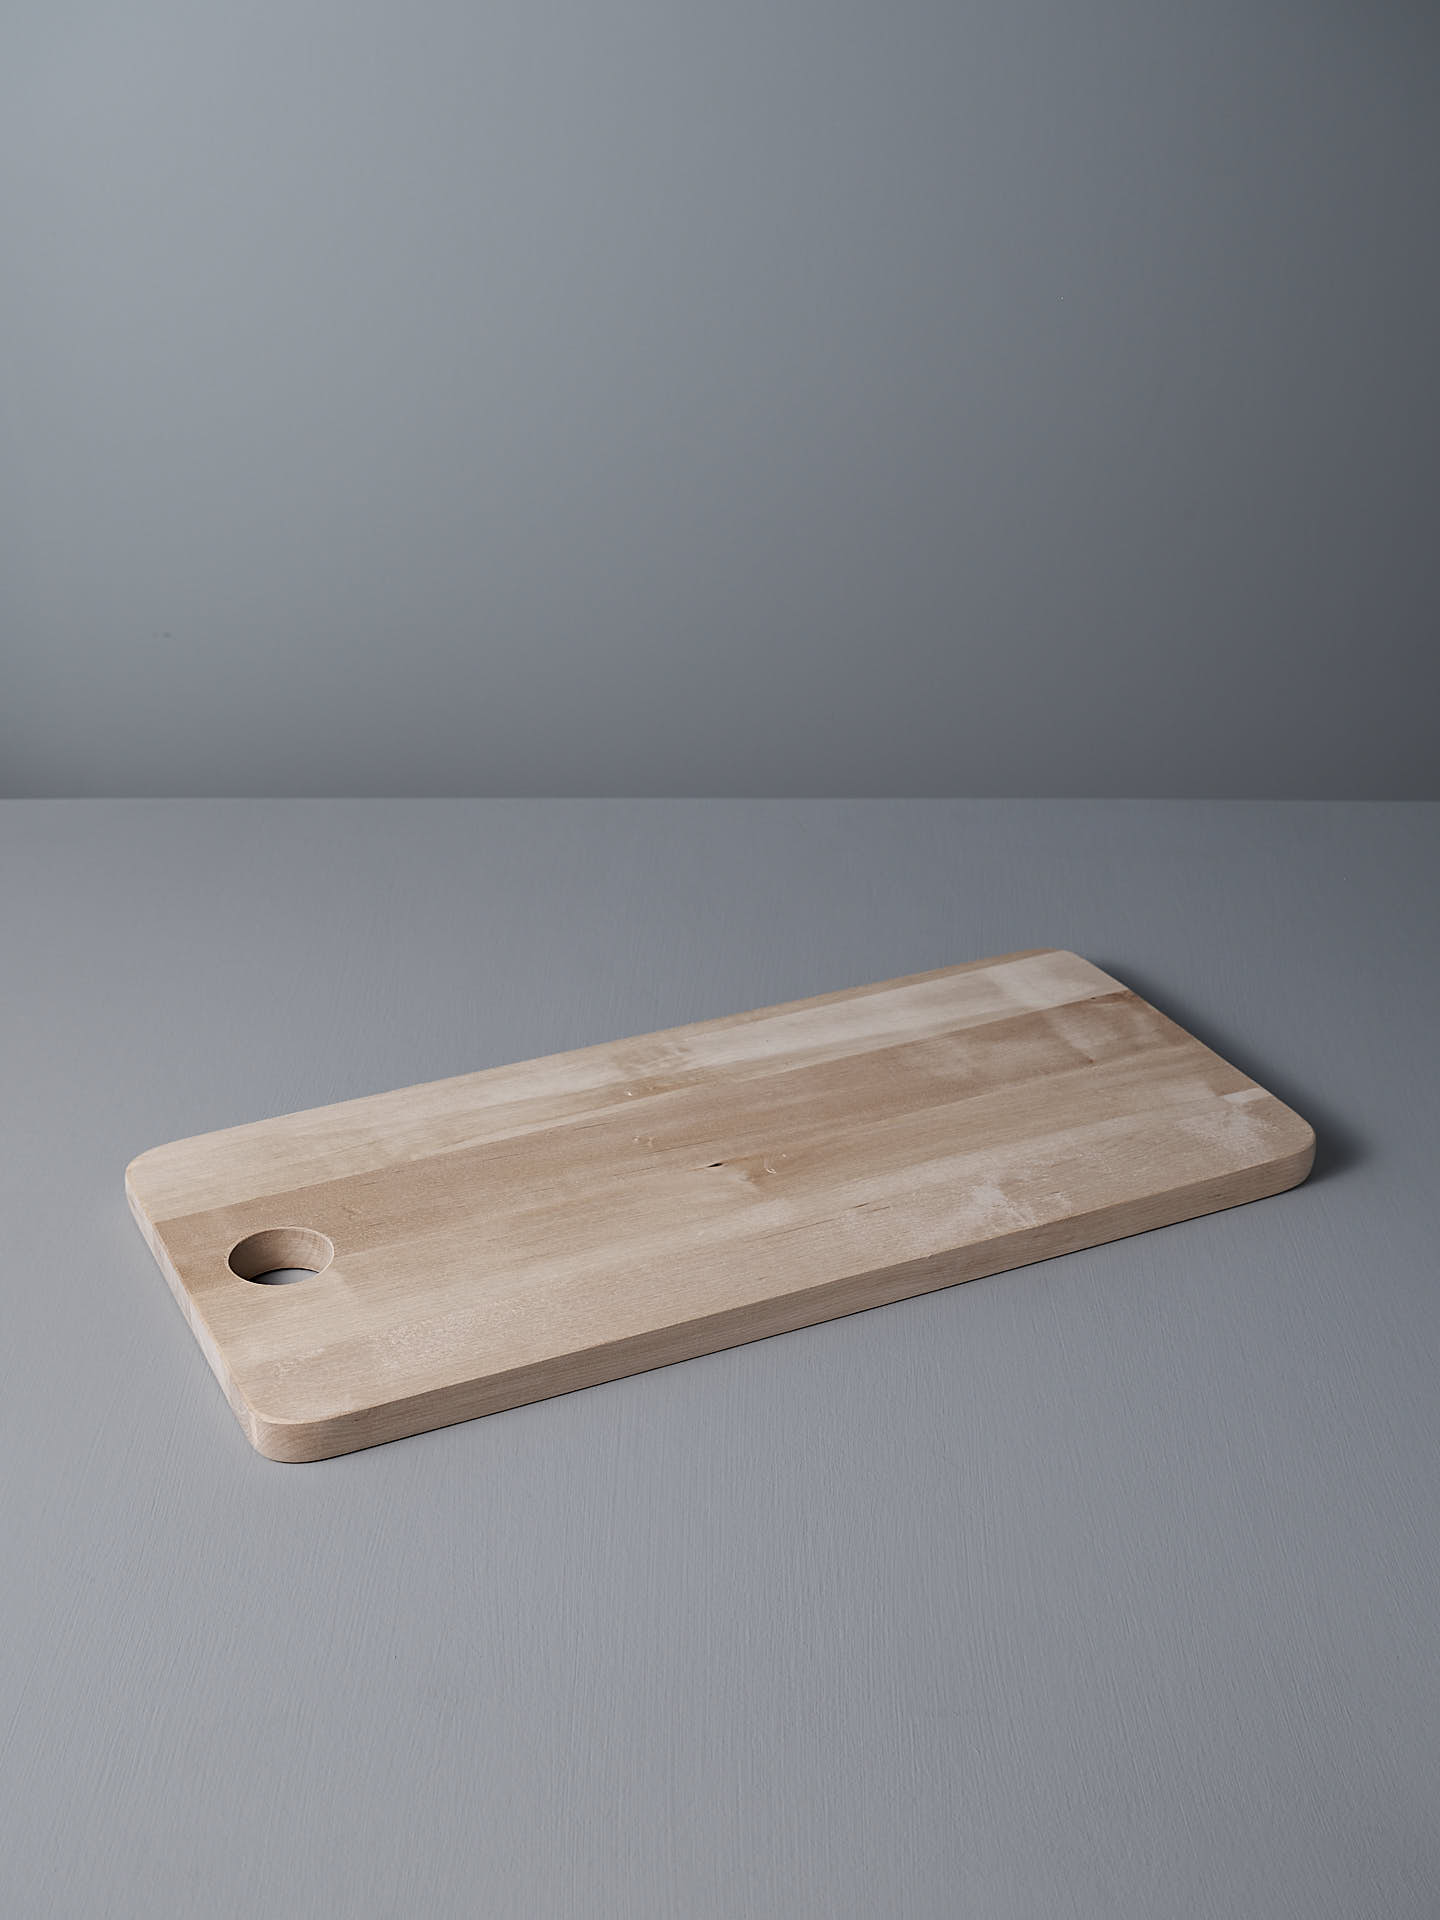 The Birch Chopping Board – Large by Iris Hantverk, with its rectangular shape, rounded edges, and small hole in one corner, lies flat on a gray surface against a matching background, doubling perfectly as a serving tray.